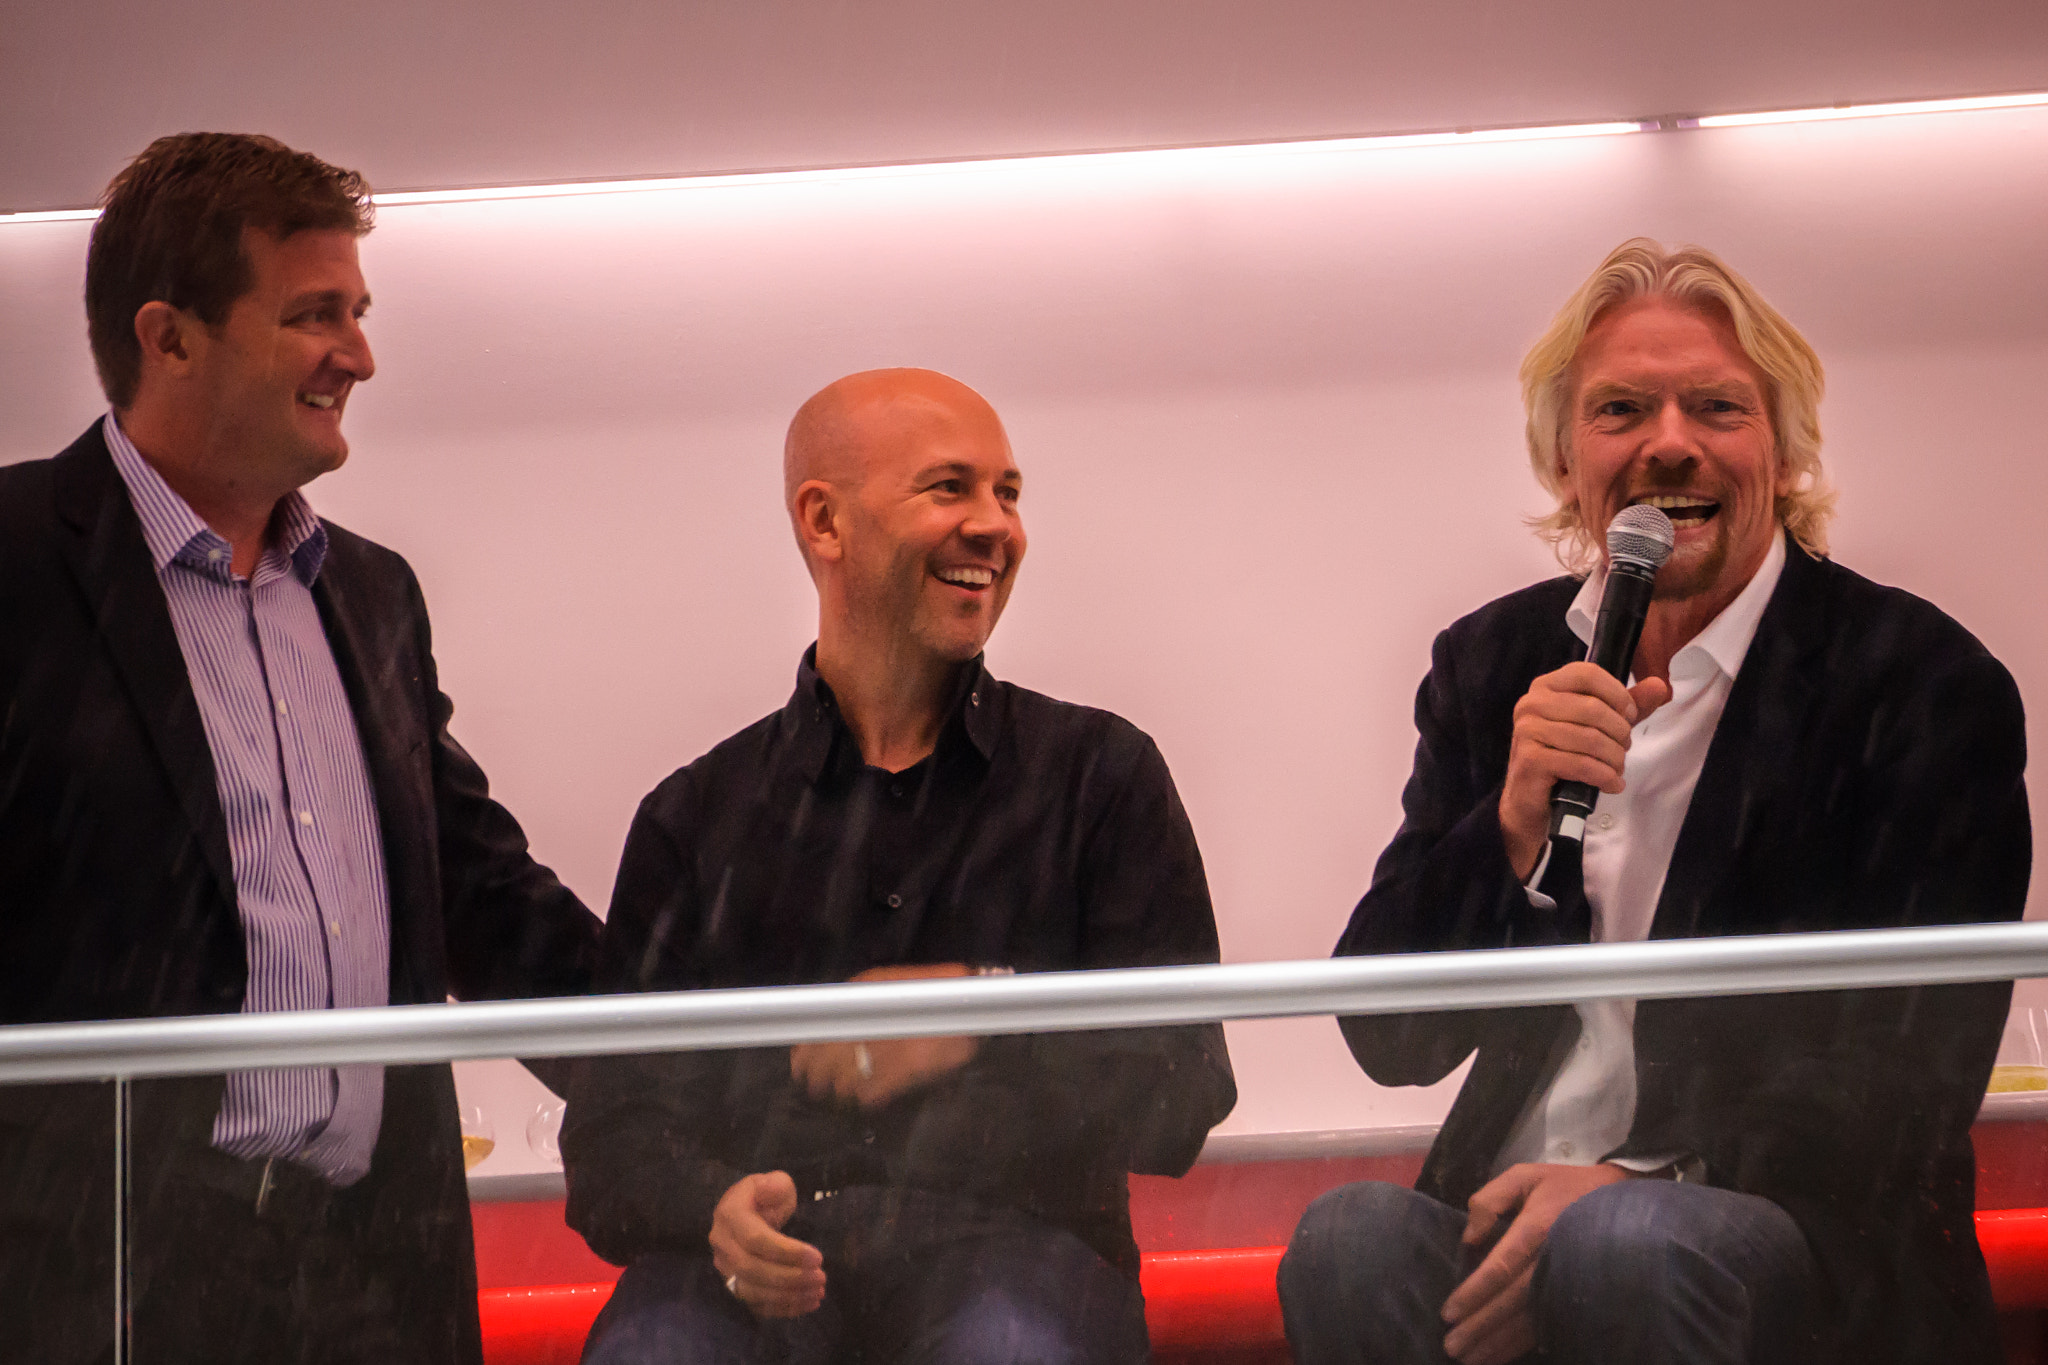 Richard Branson’s Feat Of Realizing His Dream Of Space For 17 Years